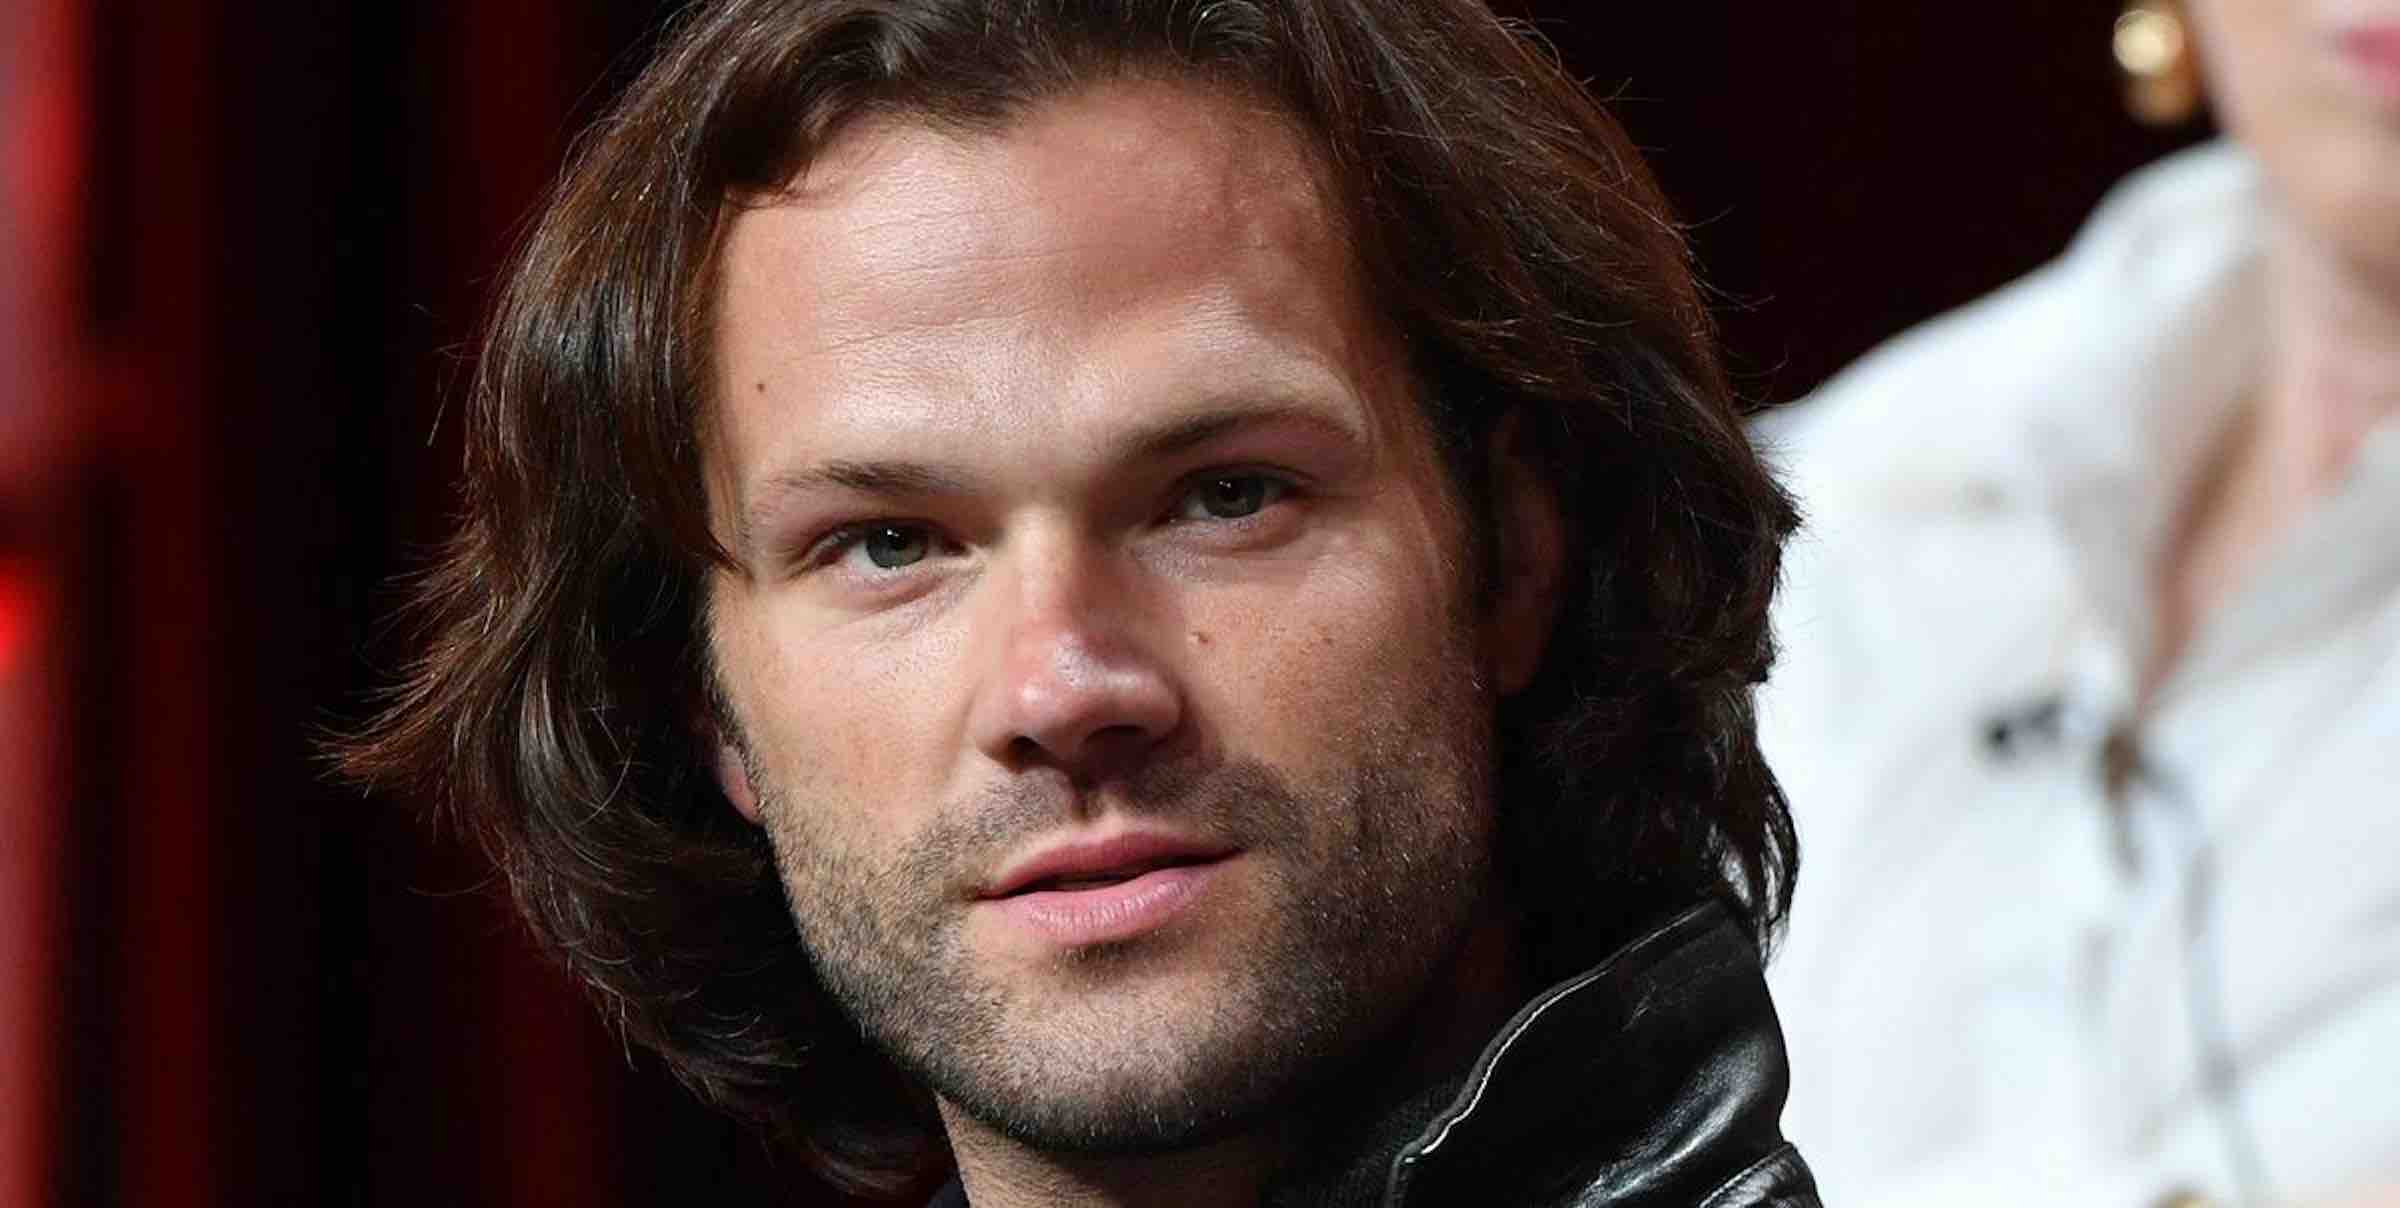 Jared Padalecki is saddling up for what’s sure to be a thrilling ride in the highly anticipated 'Walker, Texas Ranger' reboot. Here's what we know.